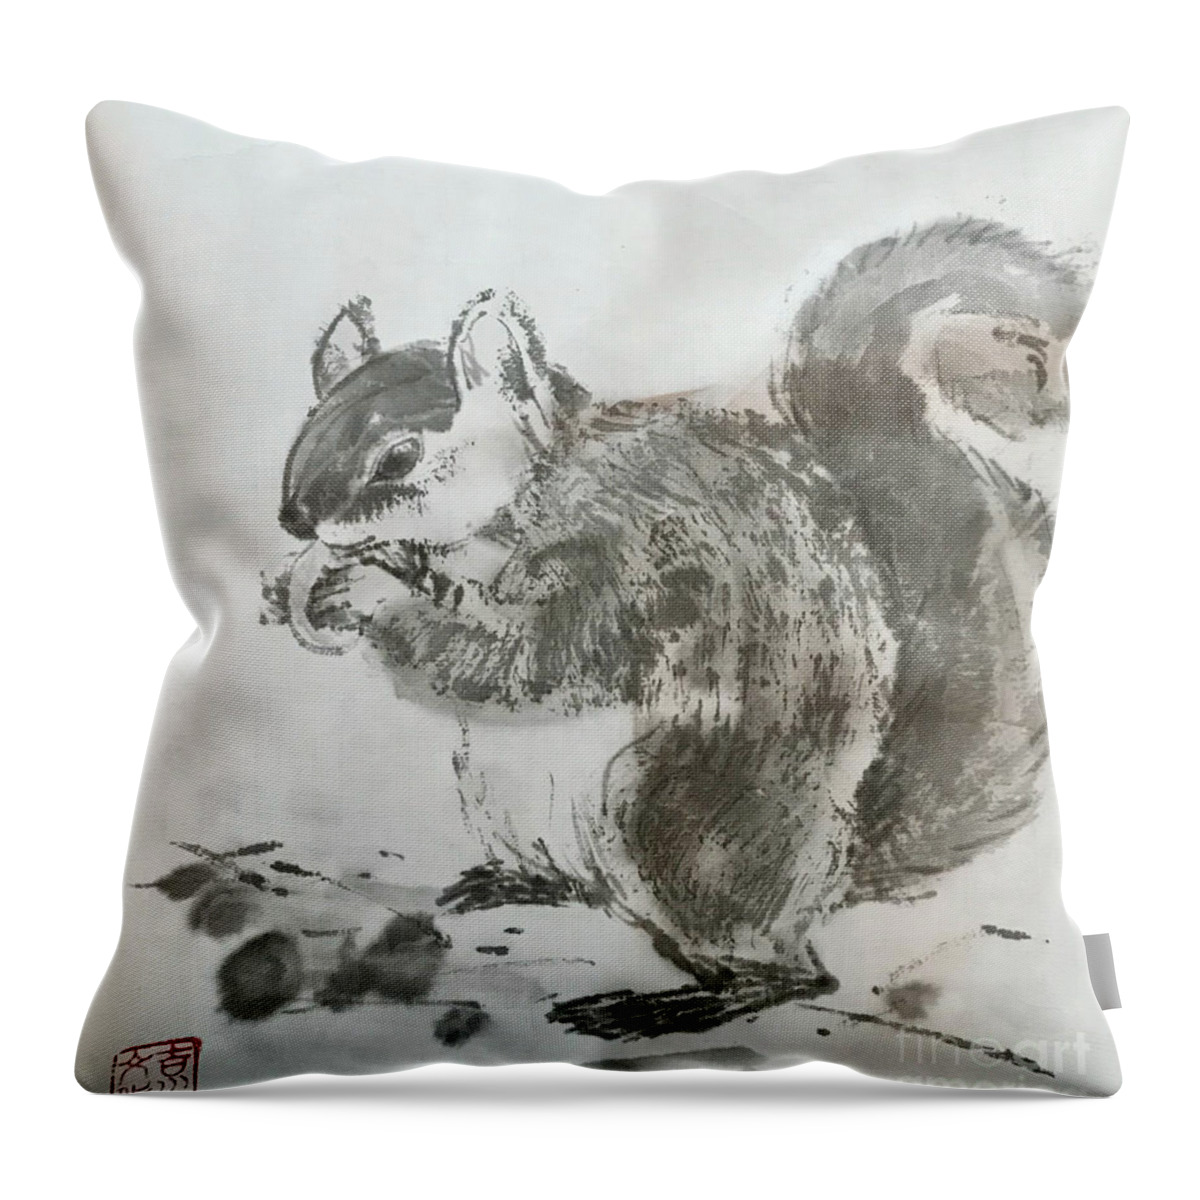 Japanese Throw Pillow featuring the painting A Squirrel by Fumiyo Yoshikawa